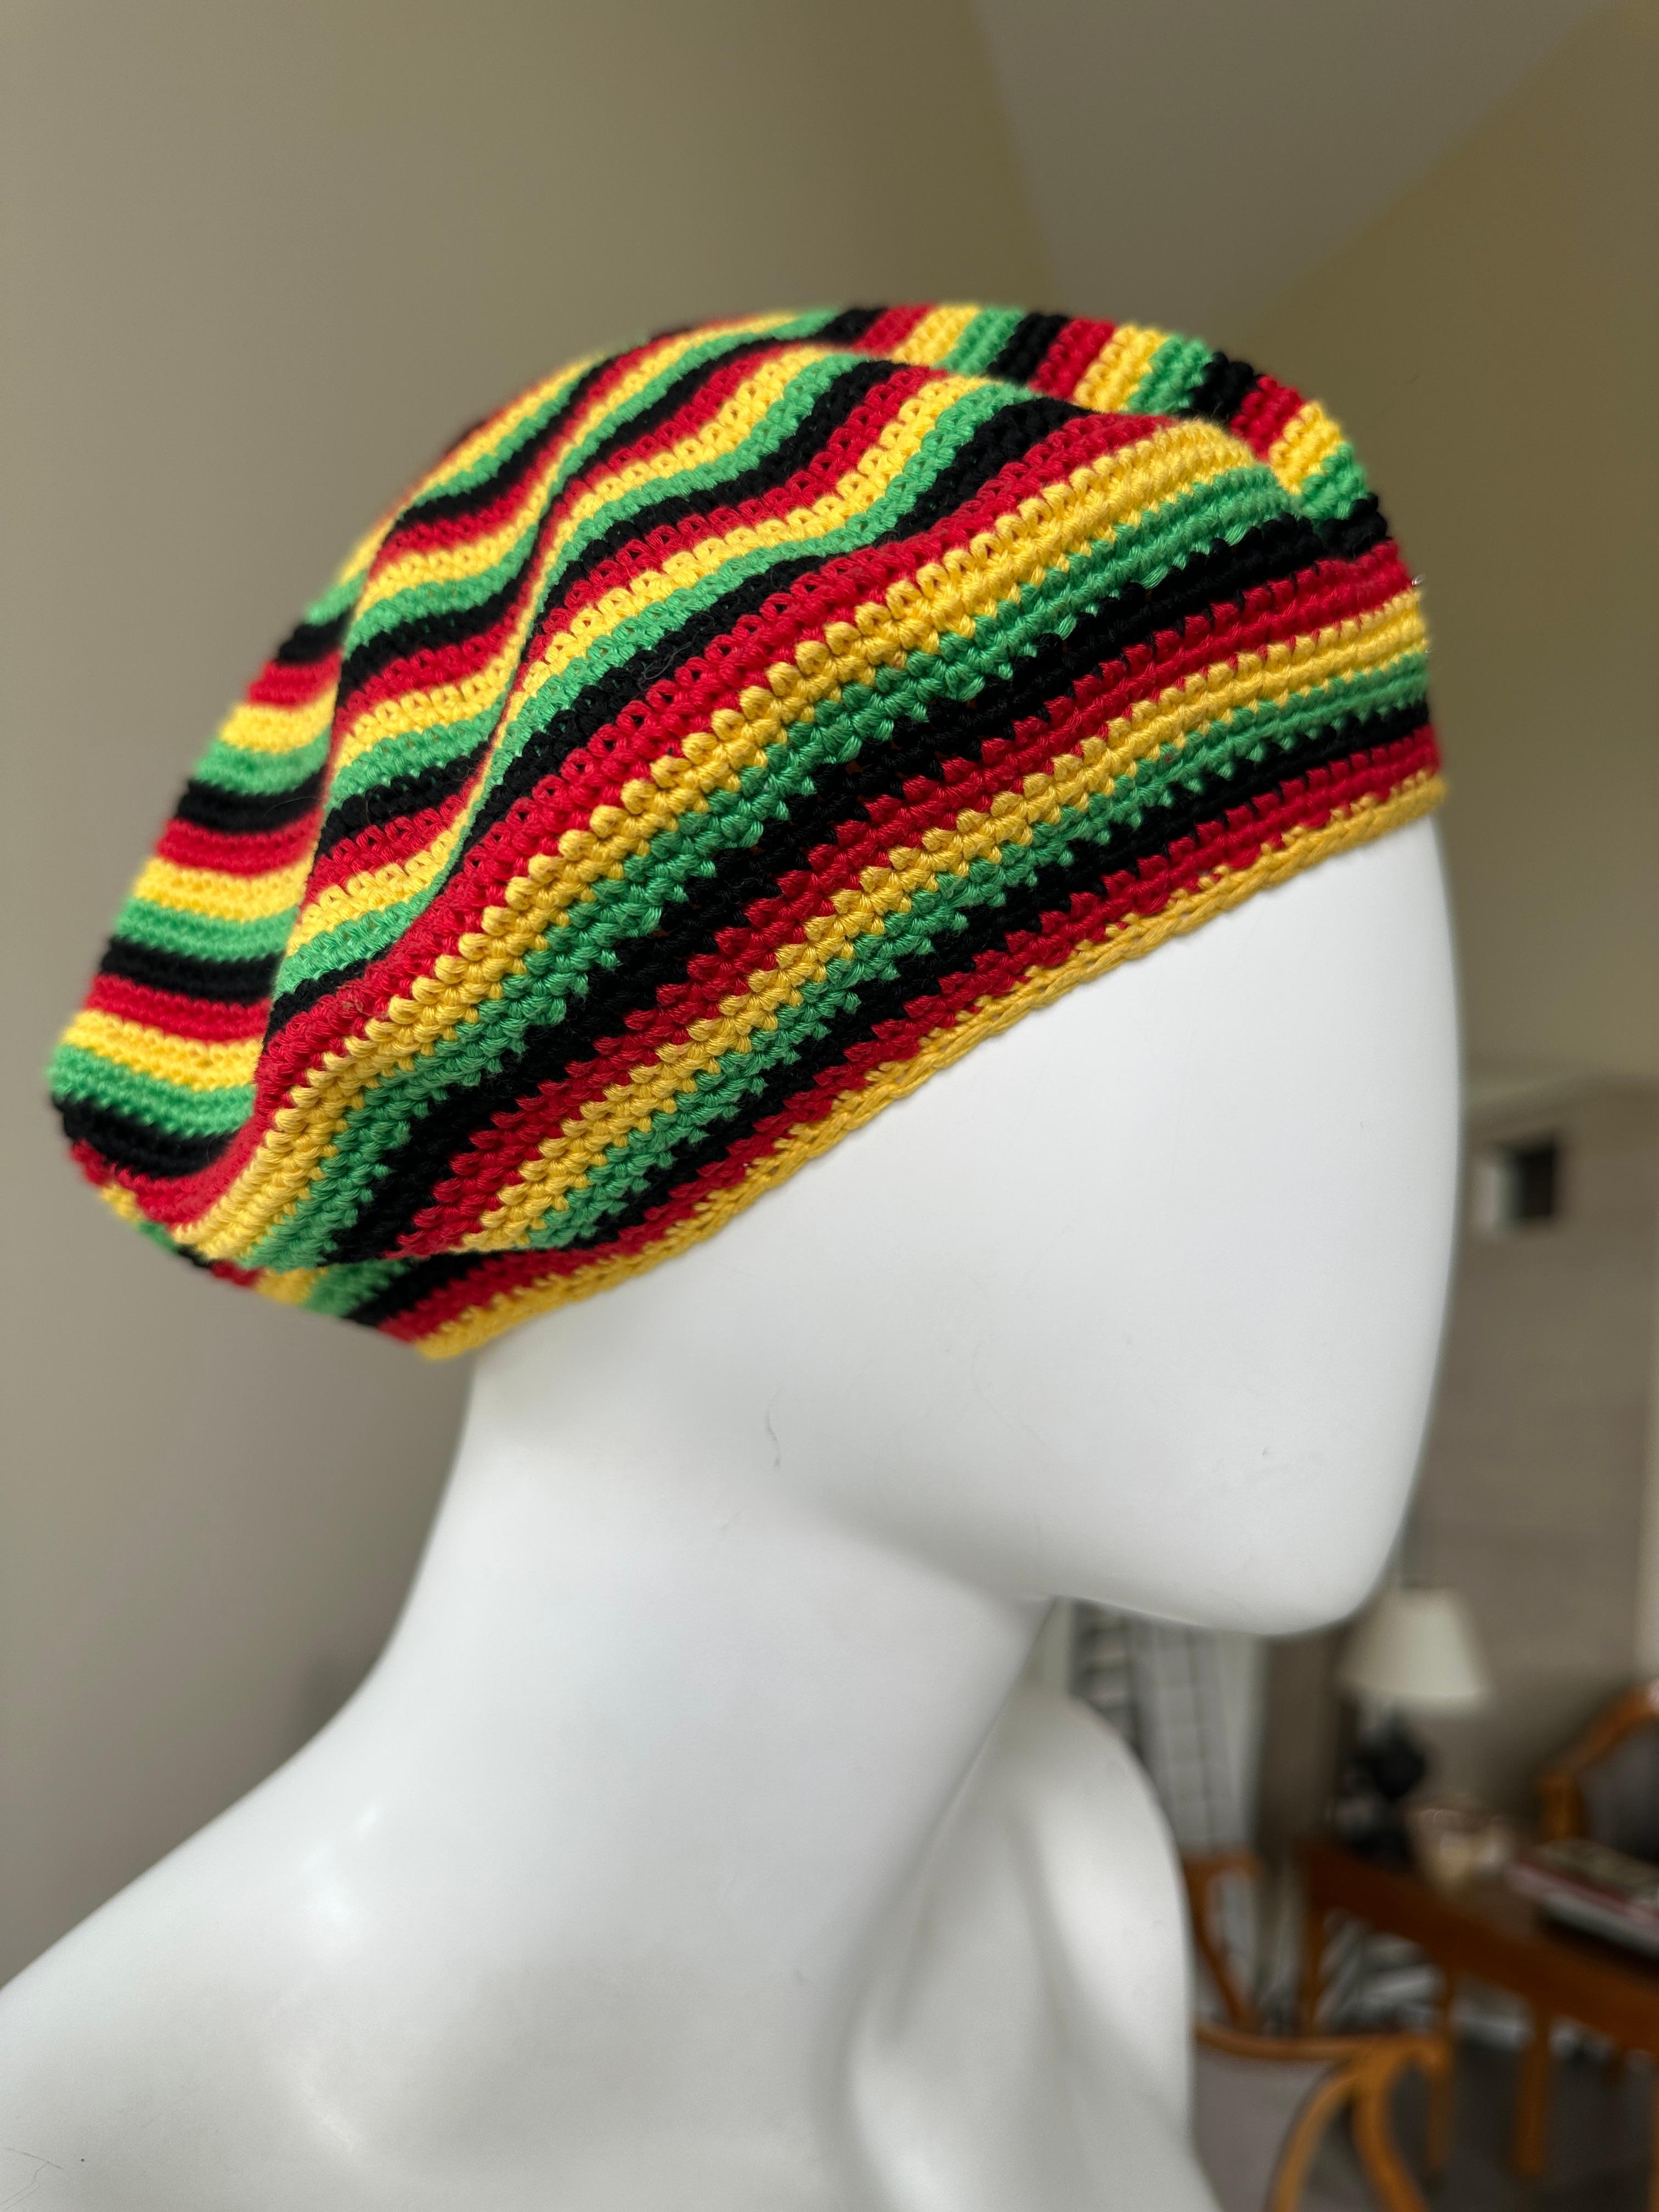 Christian Dior by John Galliano 2004 Rasta Collection Knit Cap  In Excellent Condition For Sale In Cloverdale, CA